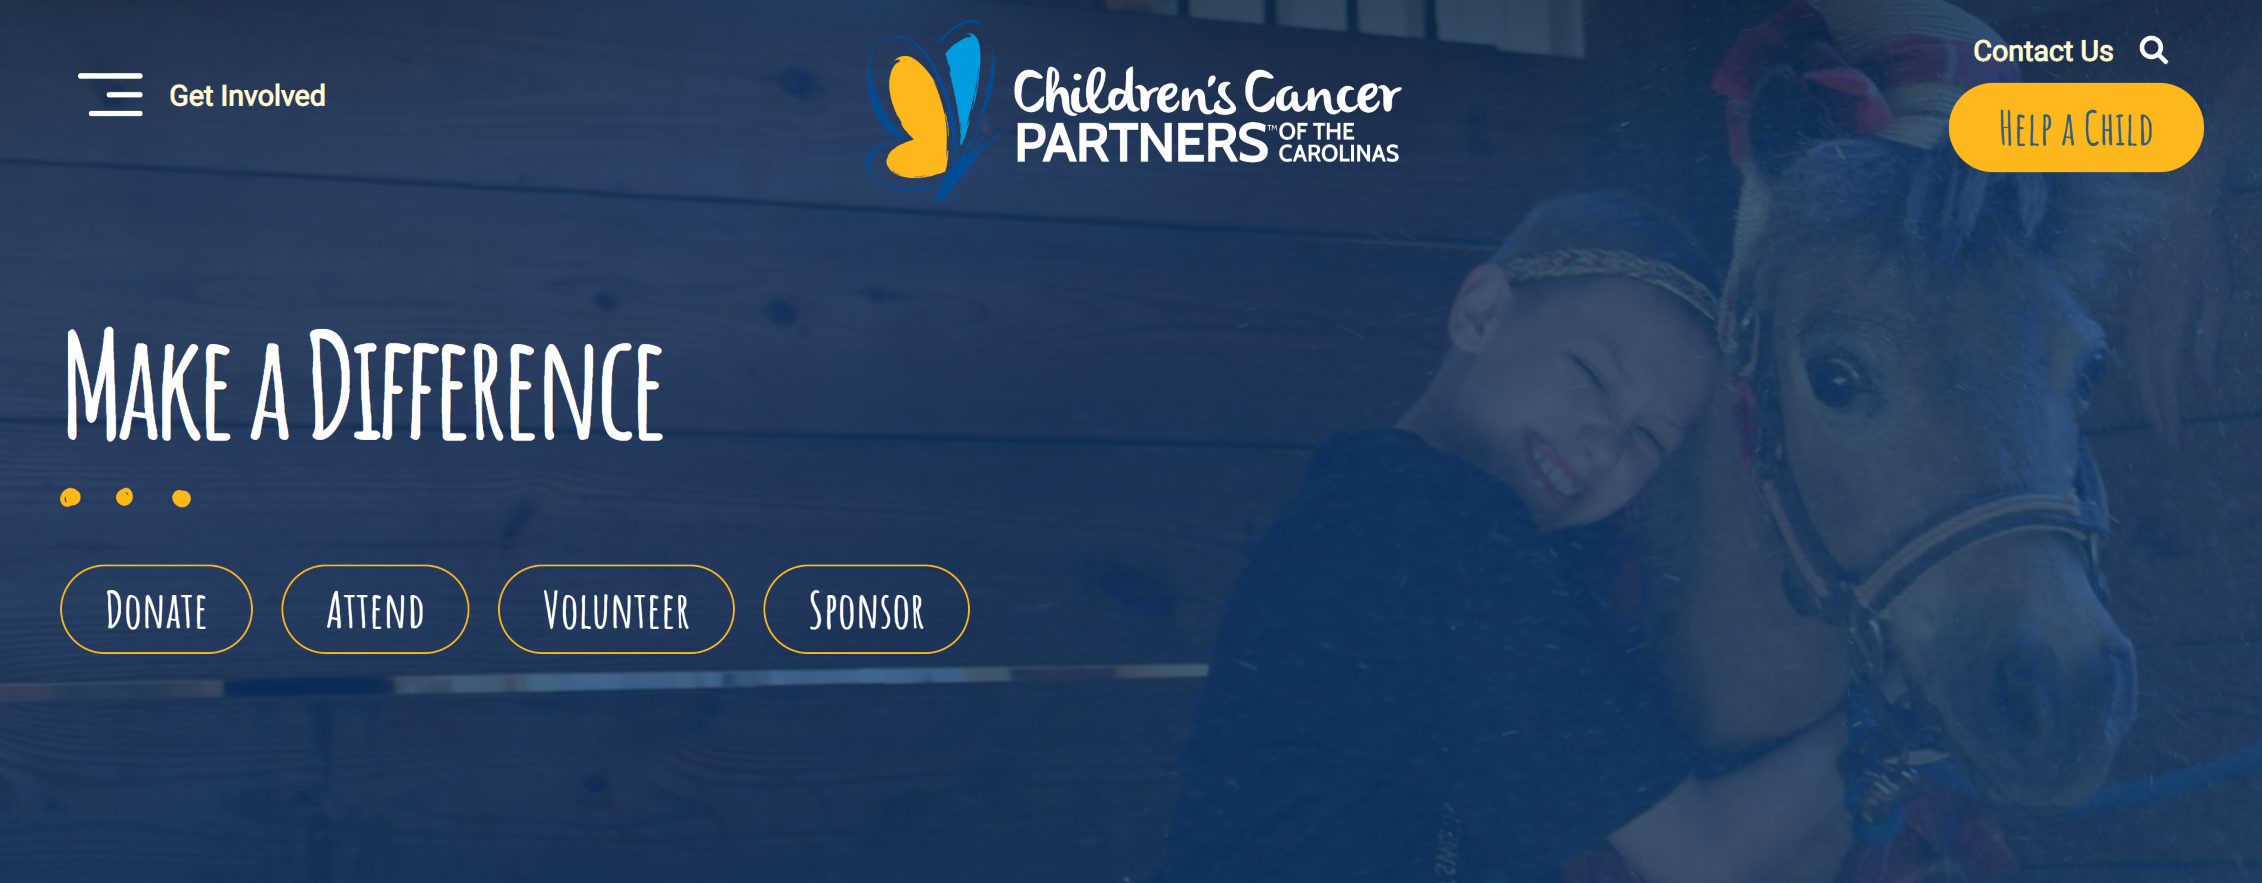 Children's Cancer Partners of the Carolinas - Make a Difference